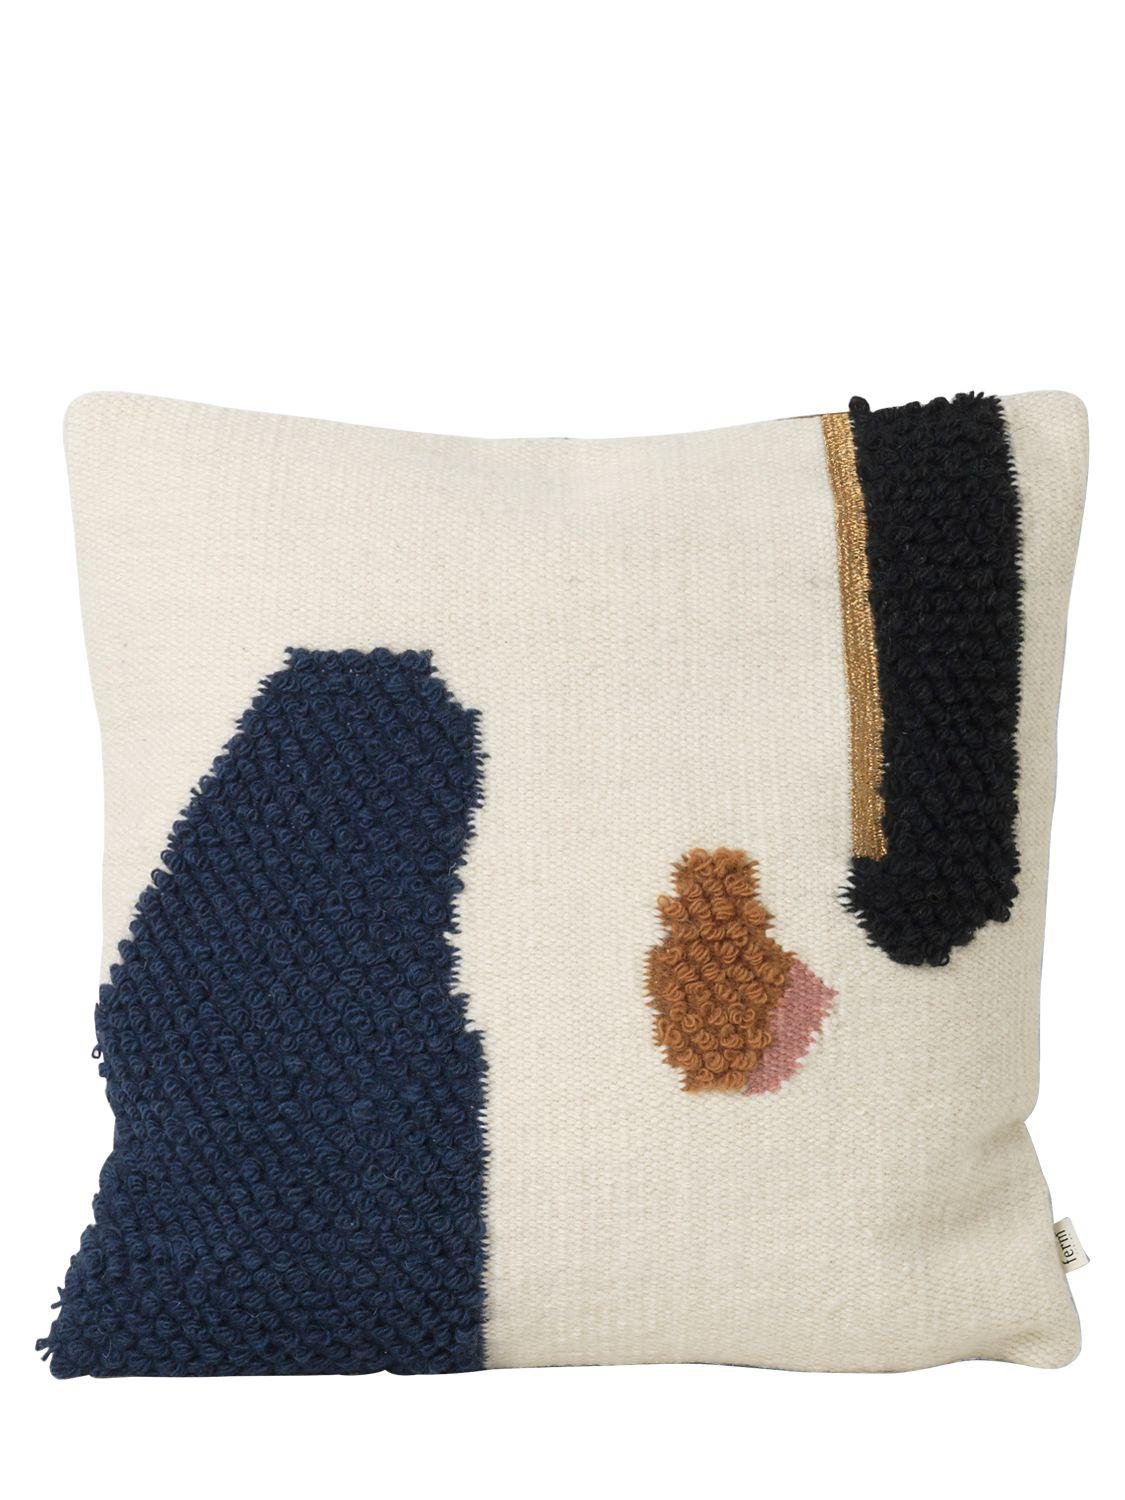 Mount Wool & Cotton Cushion by FERM LIVING